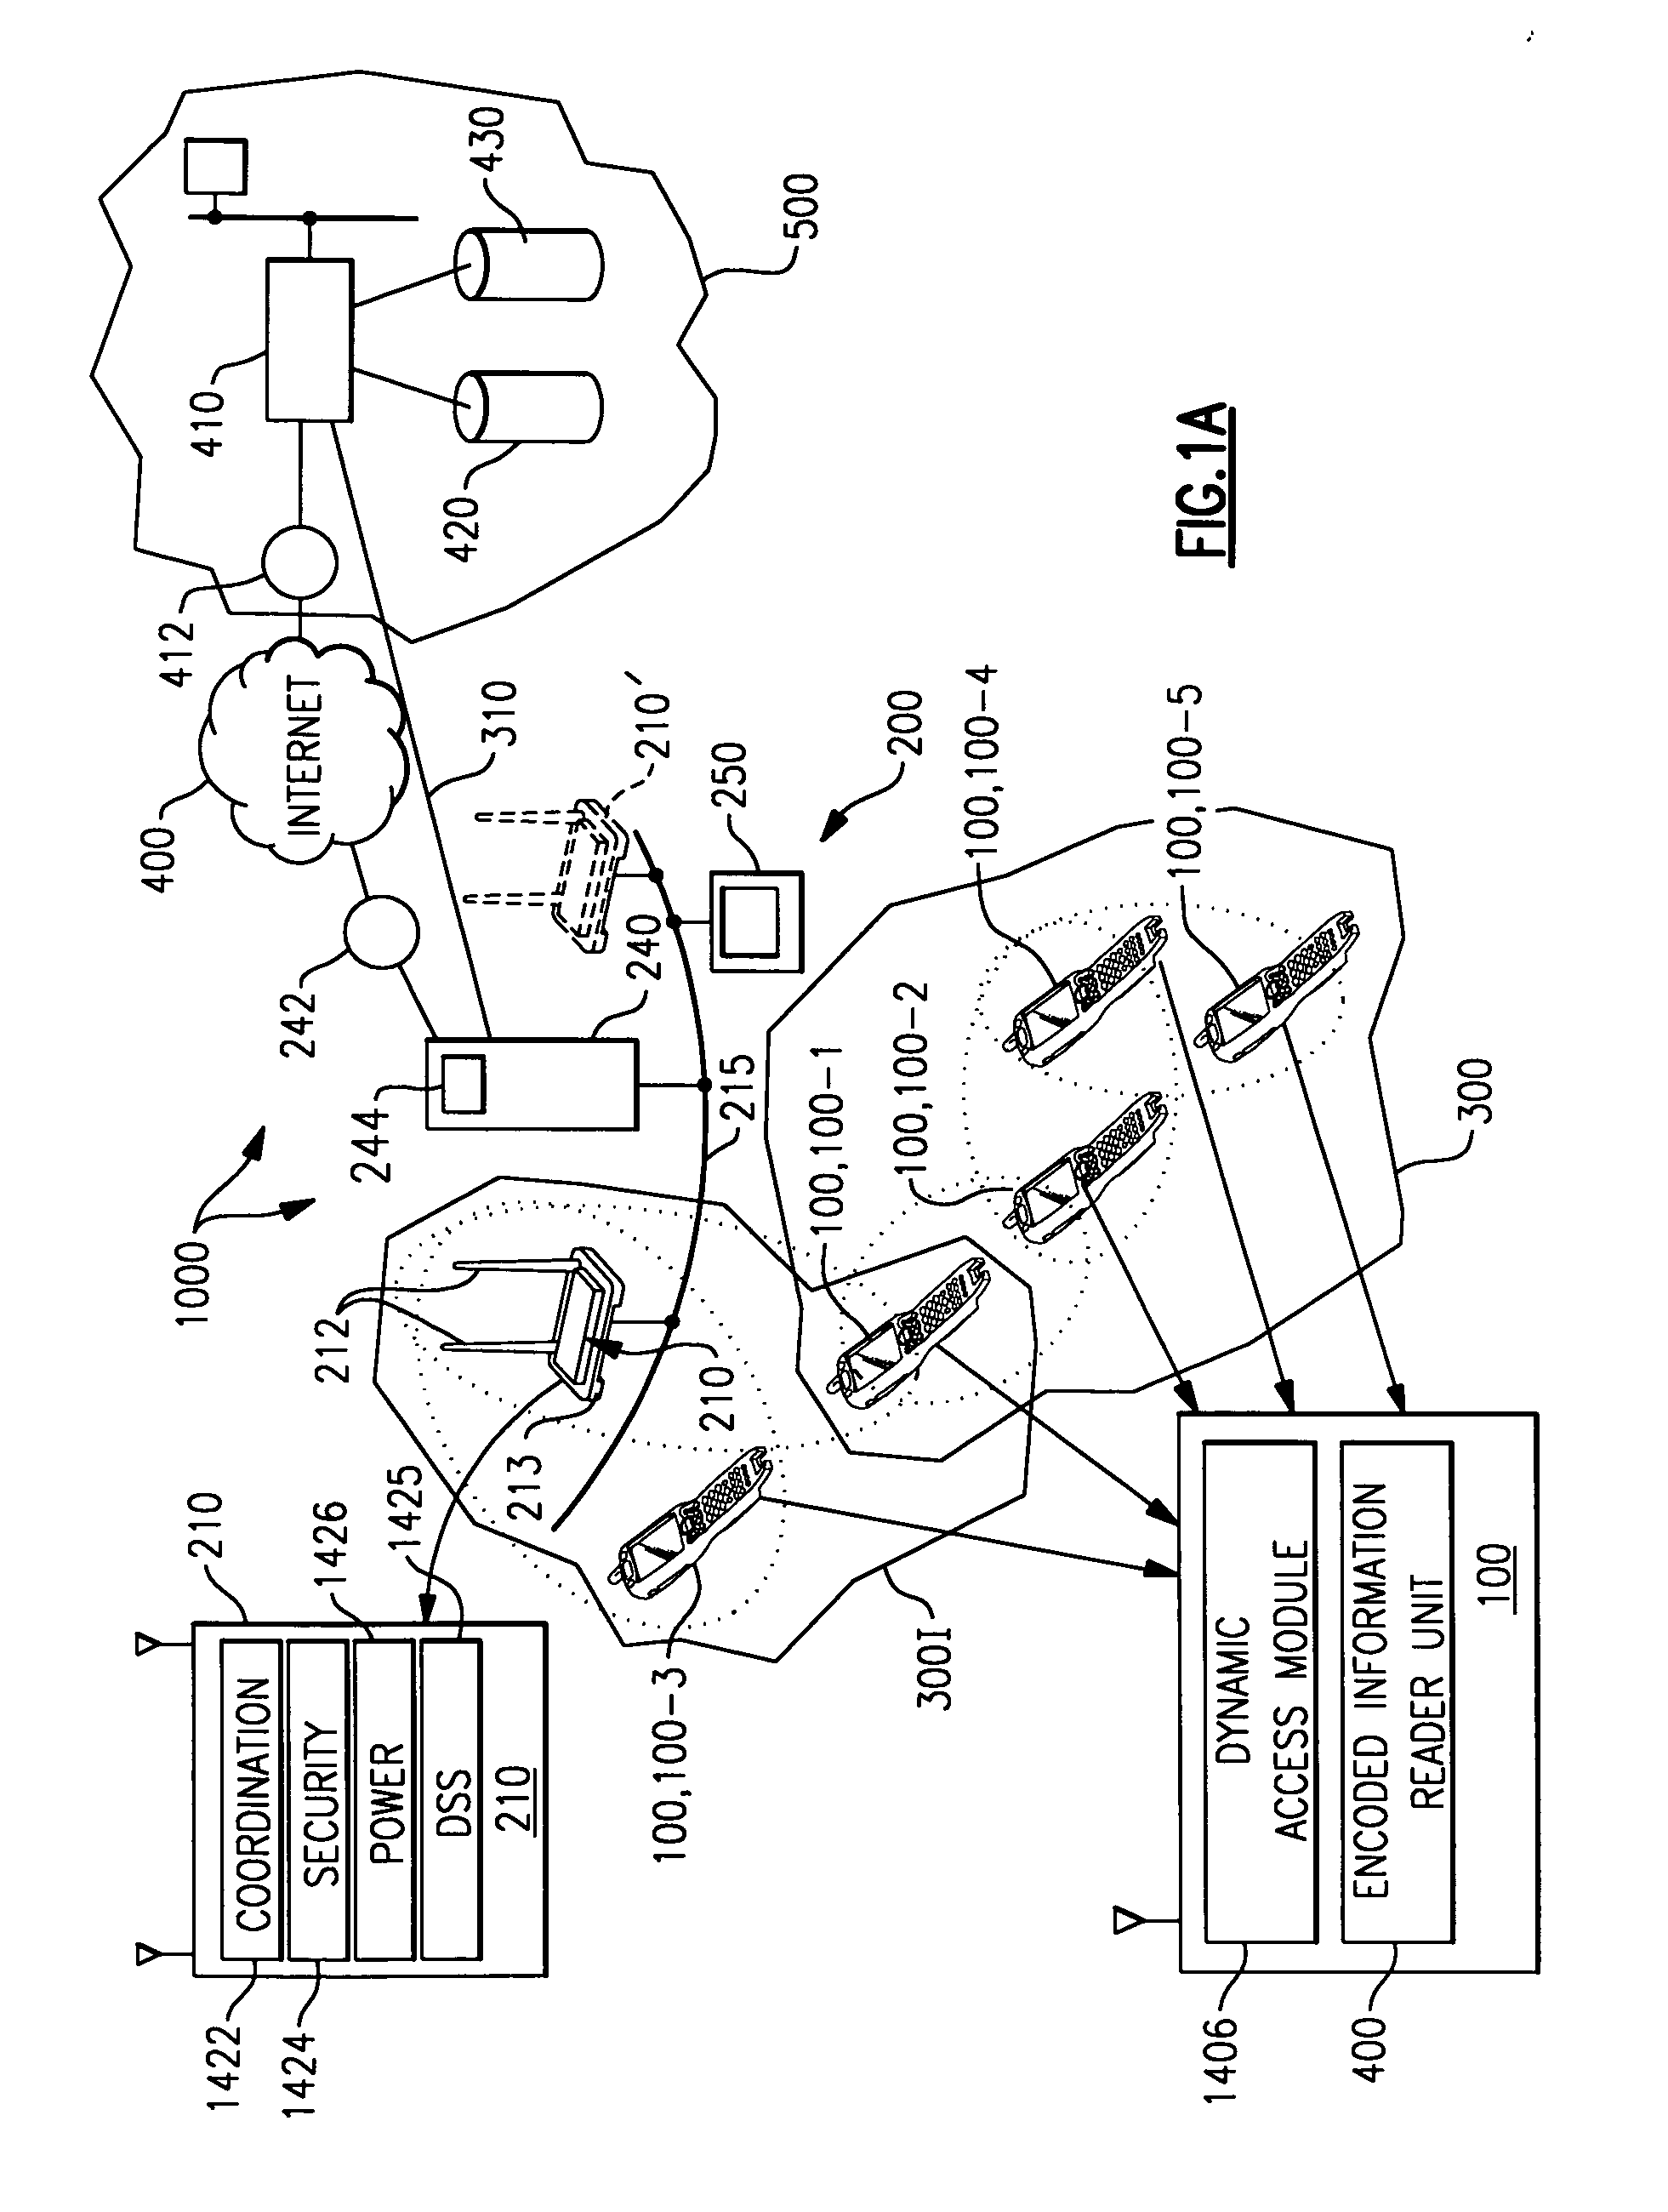 Data collection device having dynamic access to multiple wireless networks